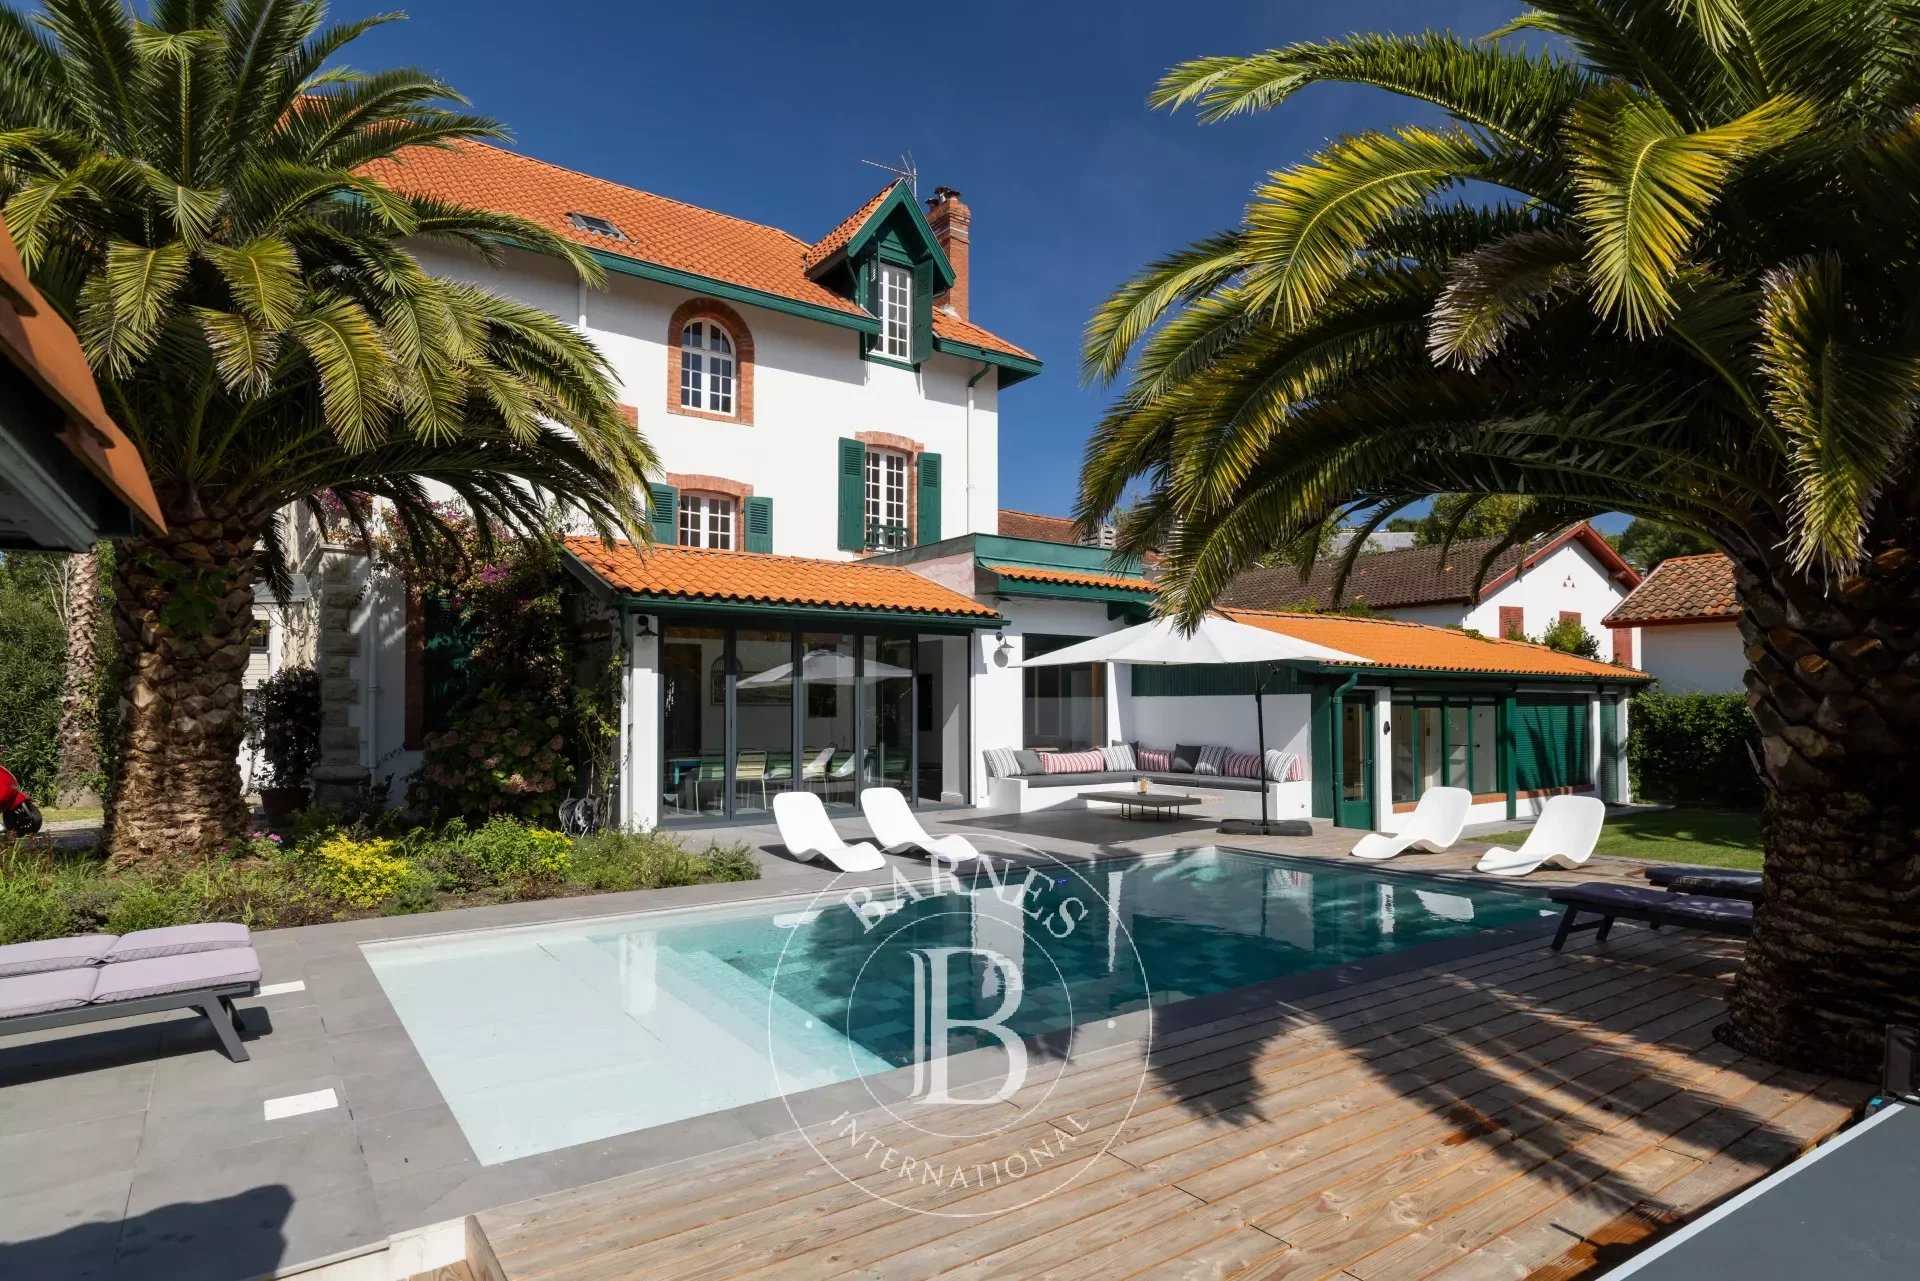 ÉMERAUDE - Superb 6 bedroom house with swimming pool, ping pong, sauna 5min from the beach of Biarritz picture 20